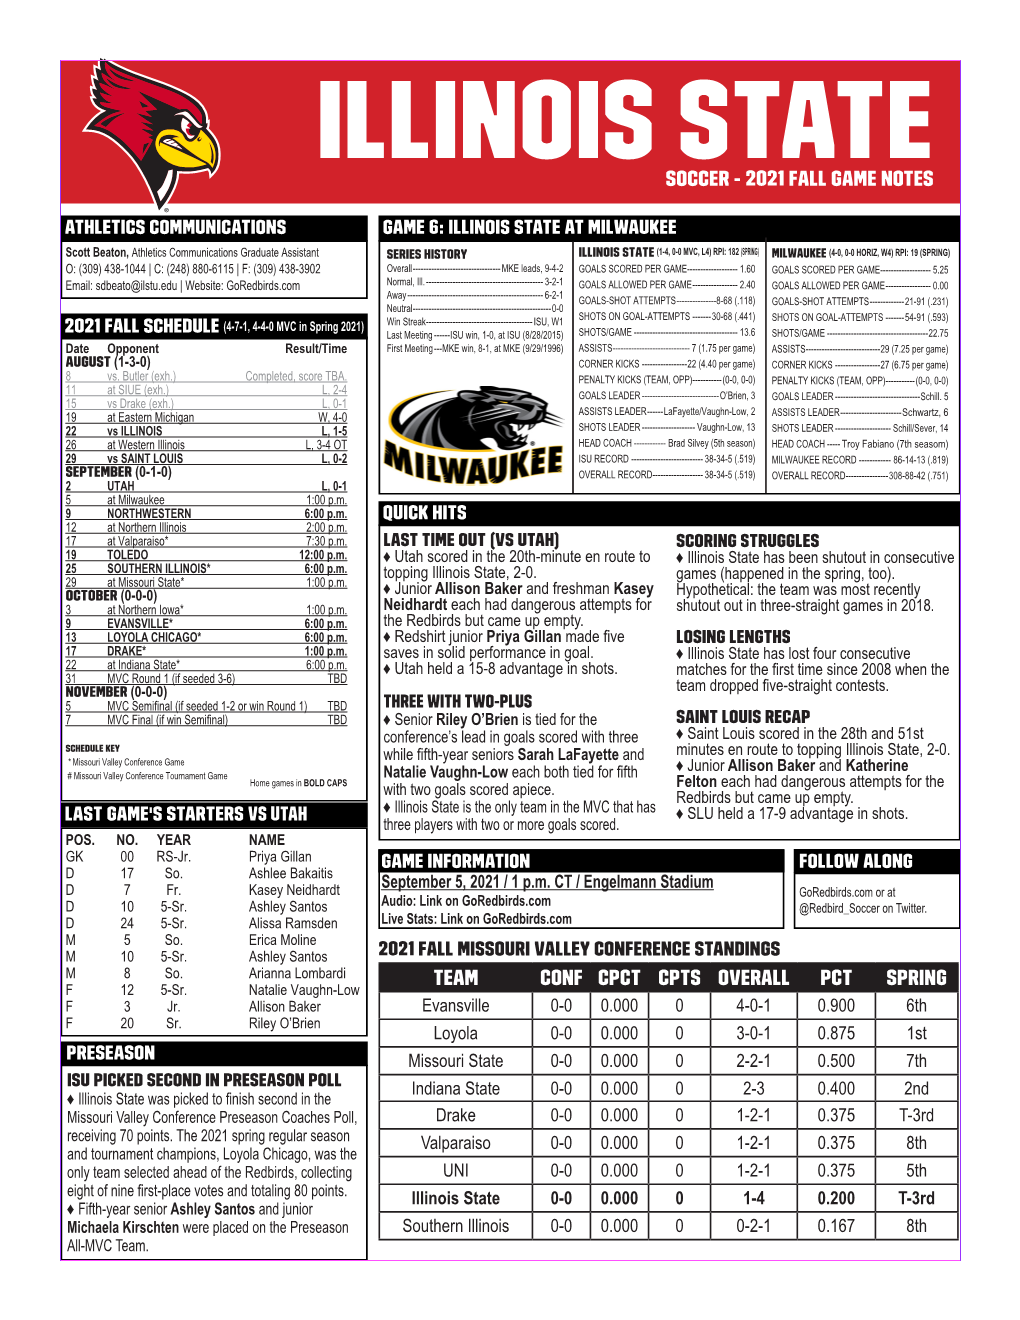 Illinois State 1 Soccer - 2021 FALL GAME NOTES Athletics Communications Game 6: Illinois State at Milwaukee